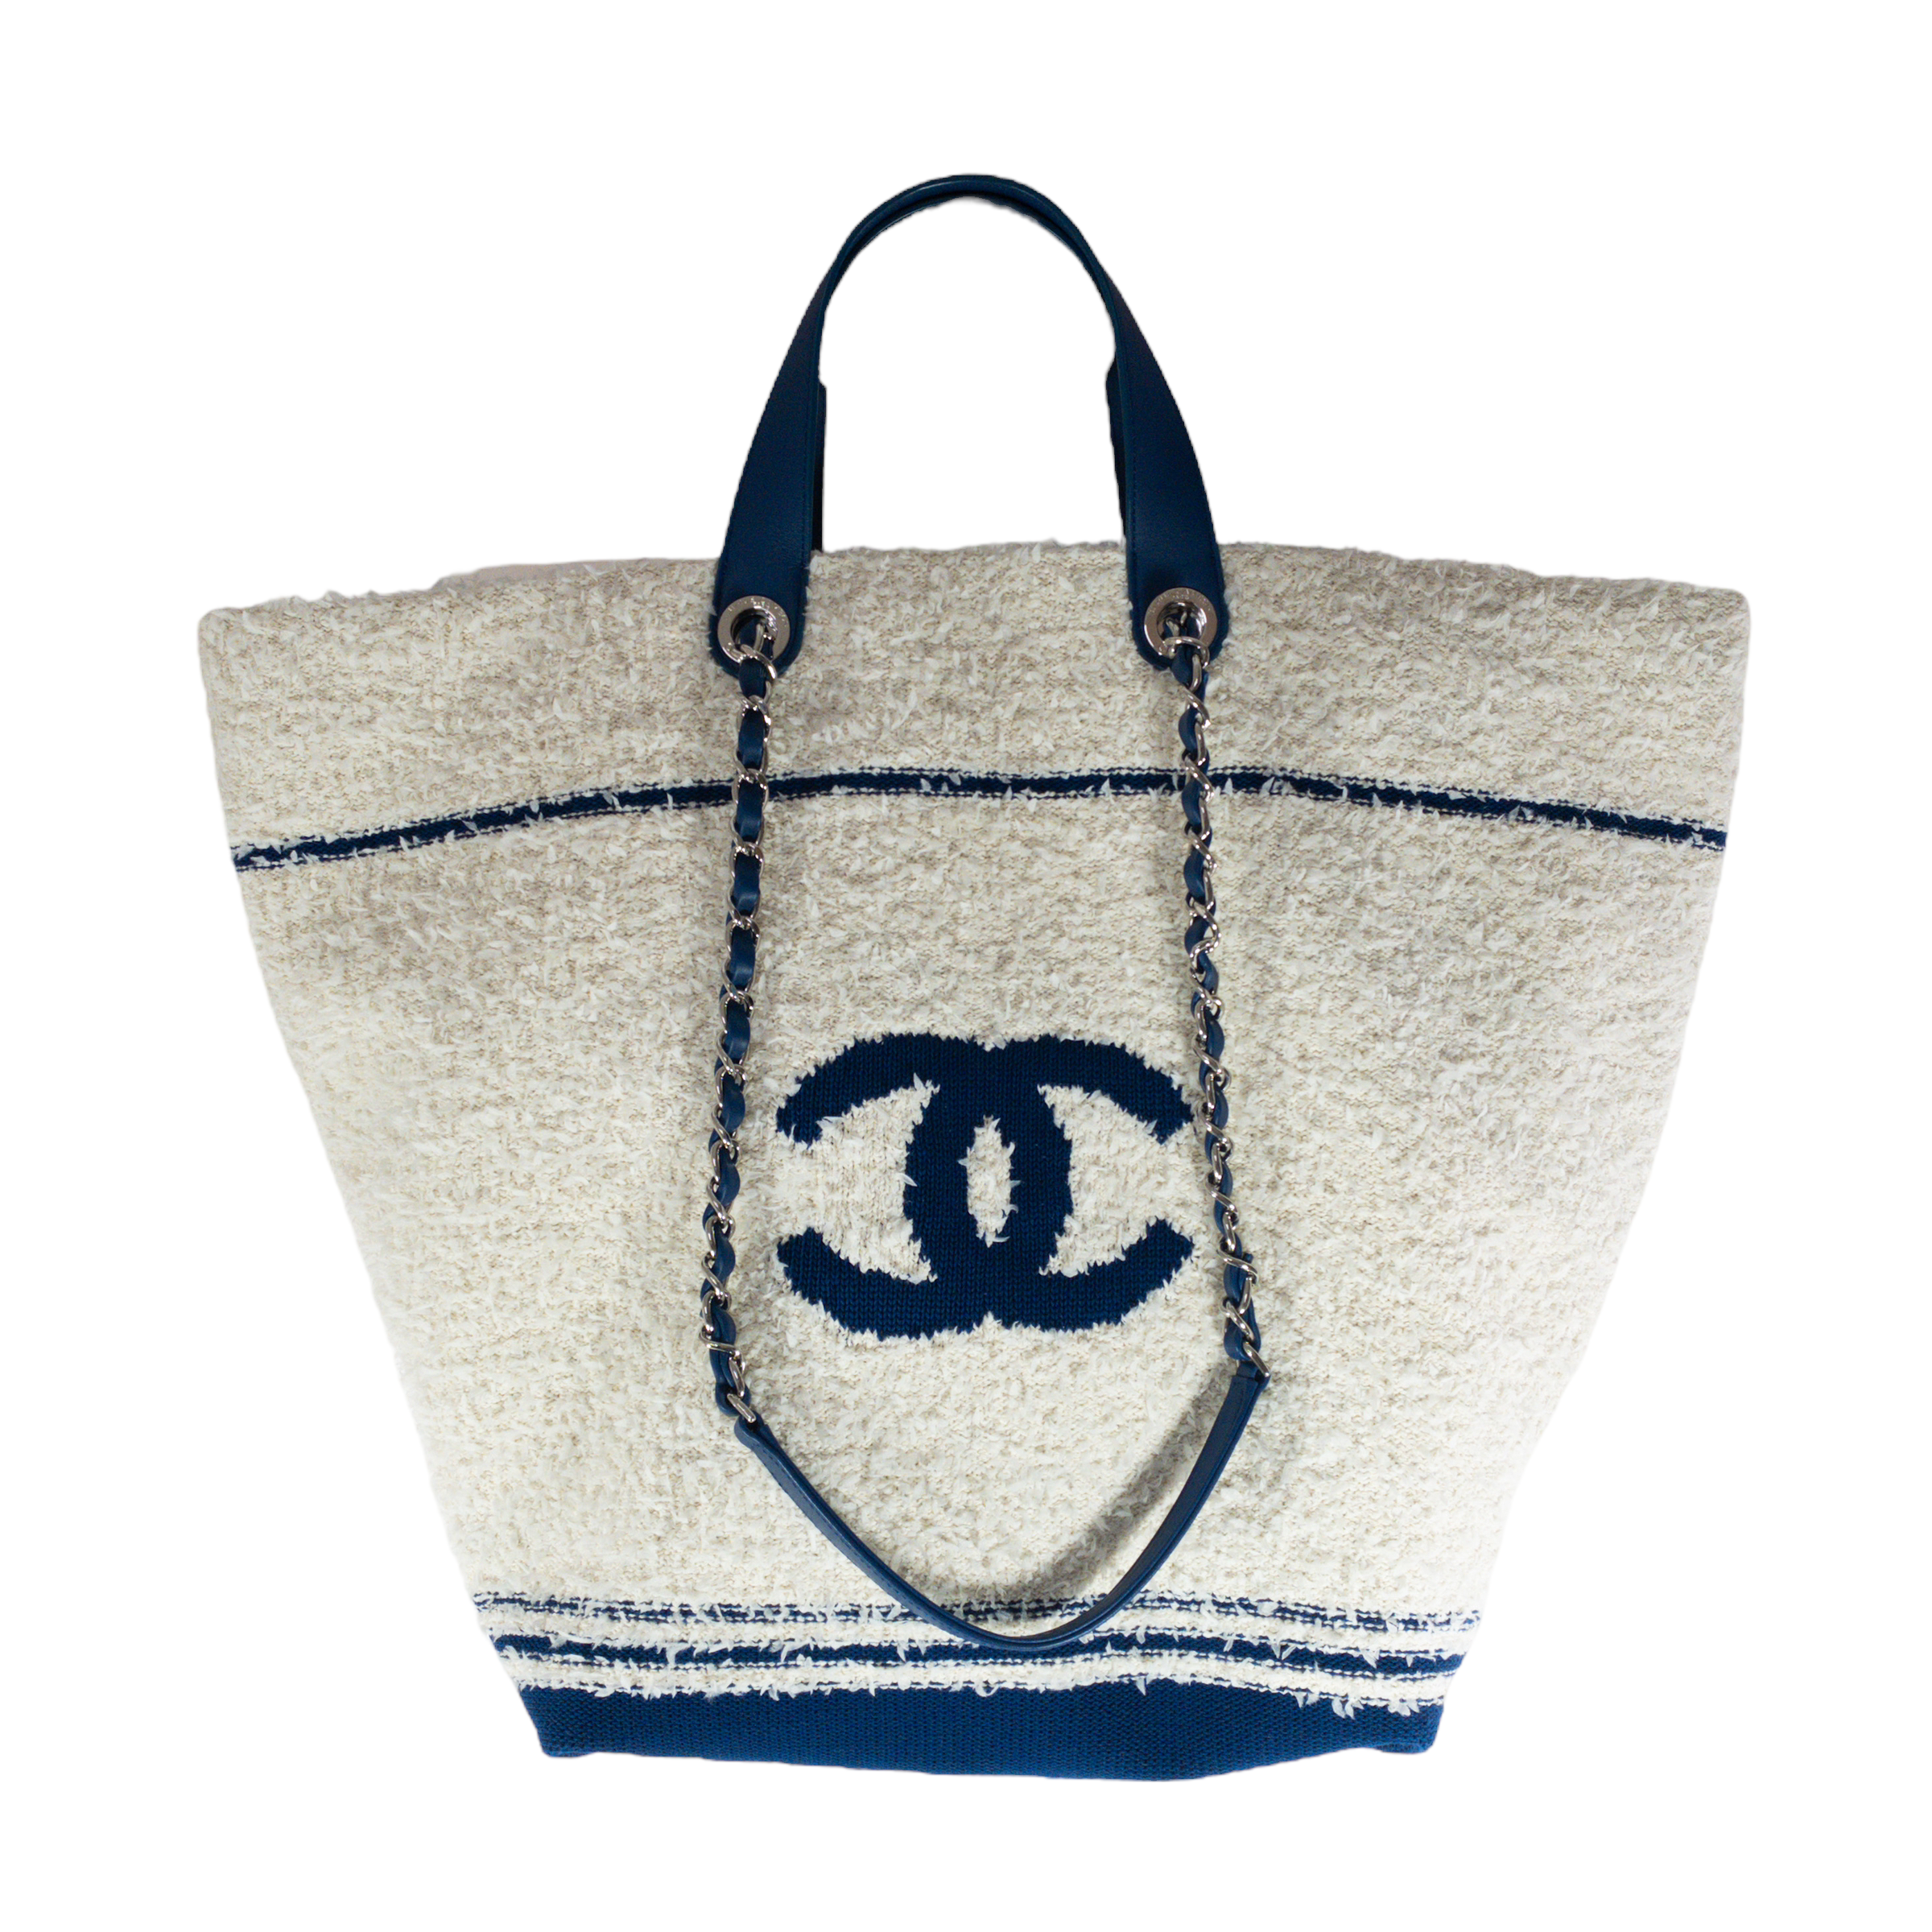 Chanel XL Tweed Deauville/Biarritz Tote